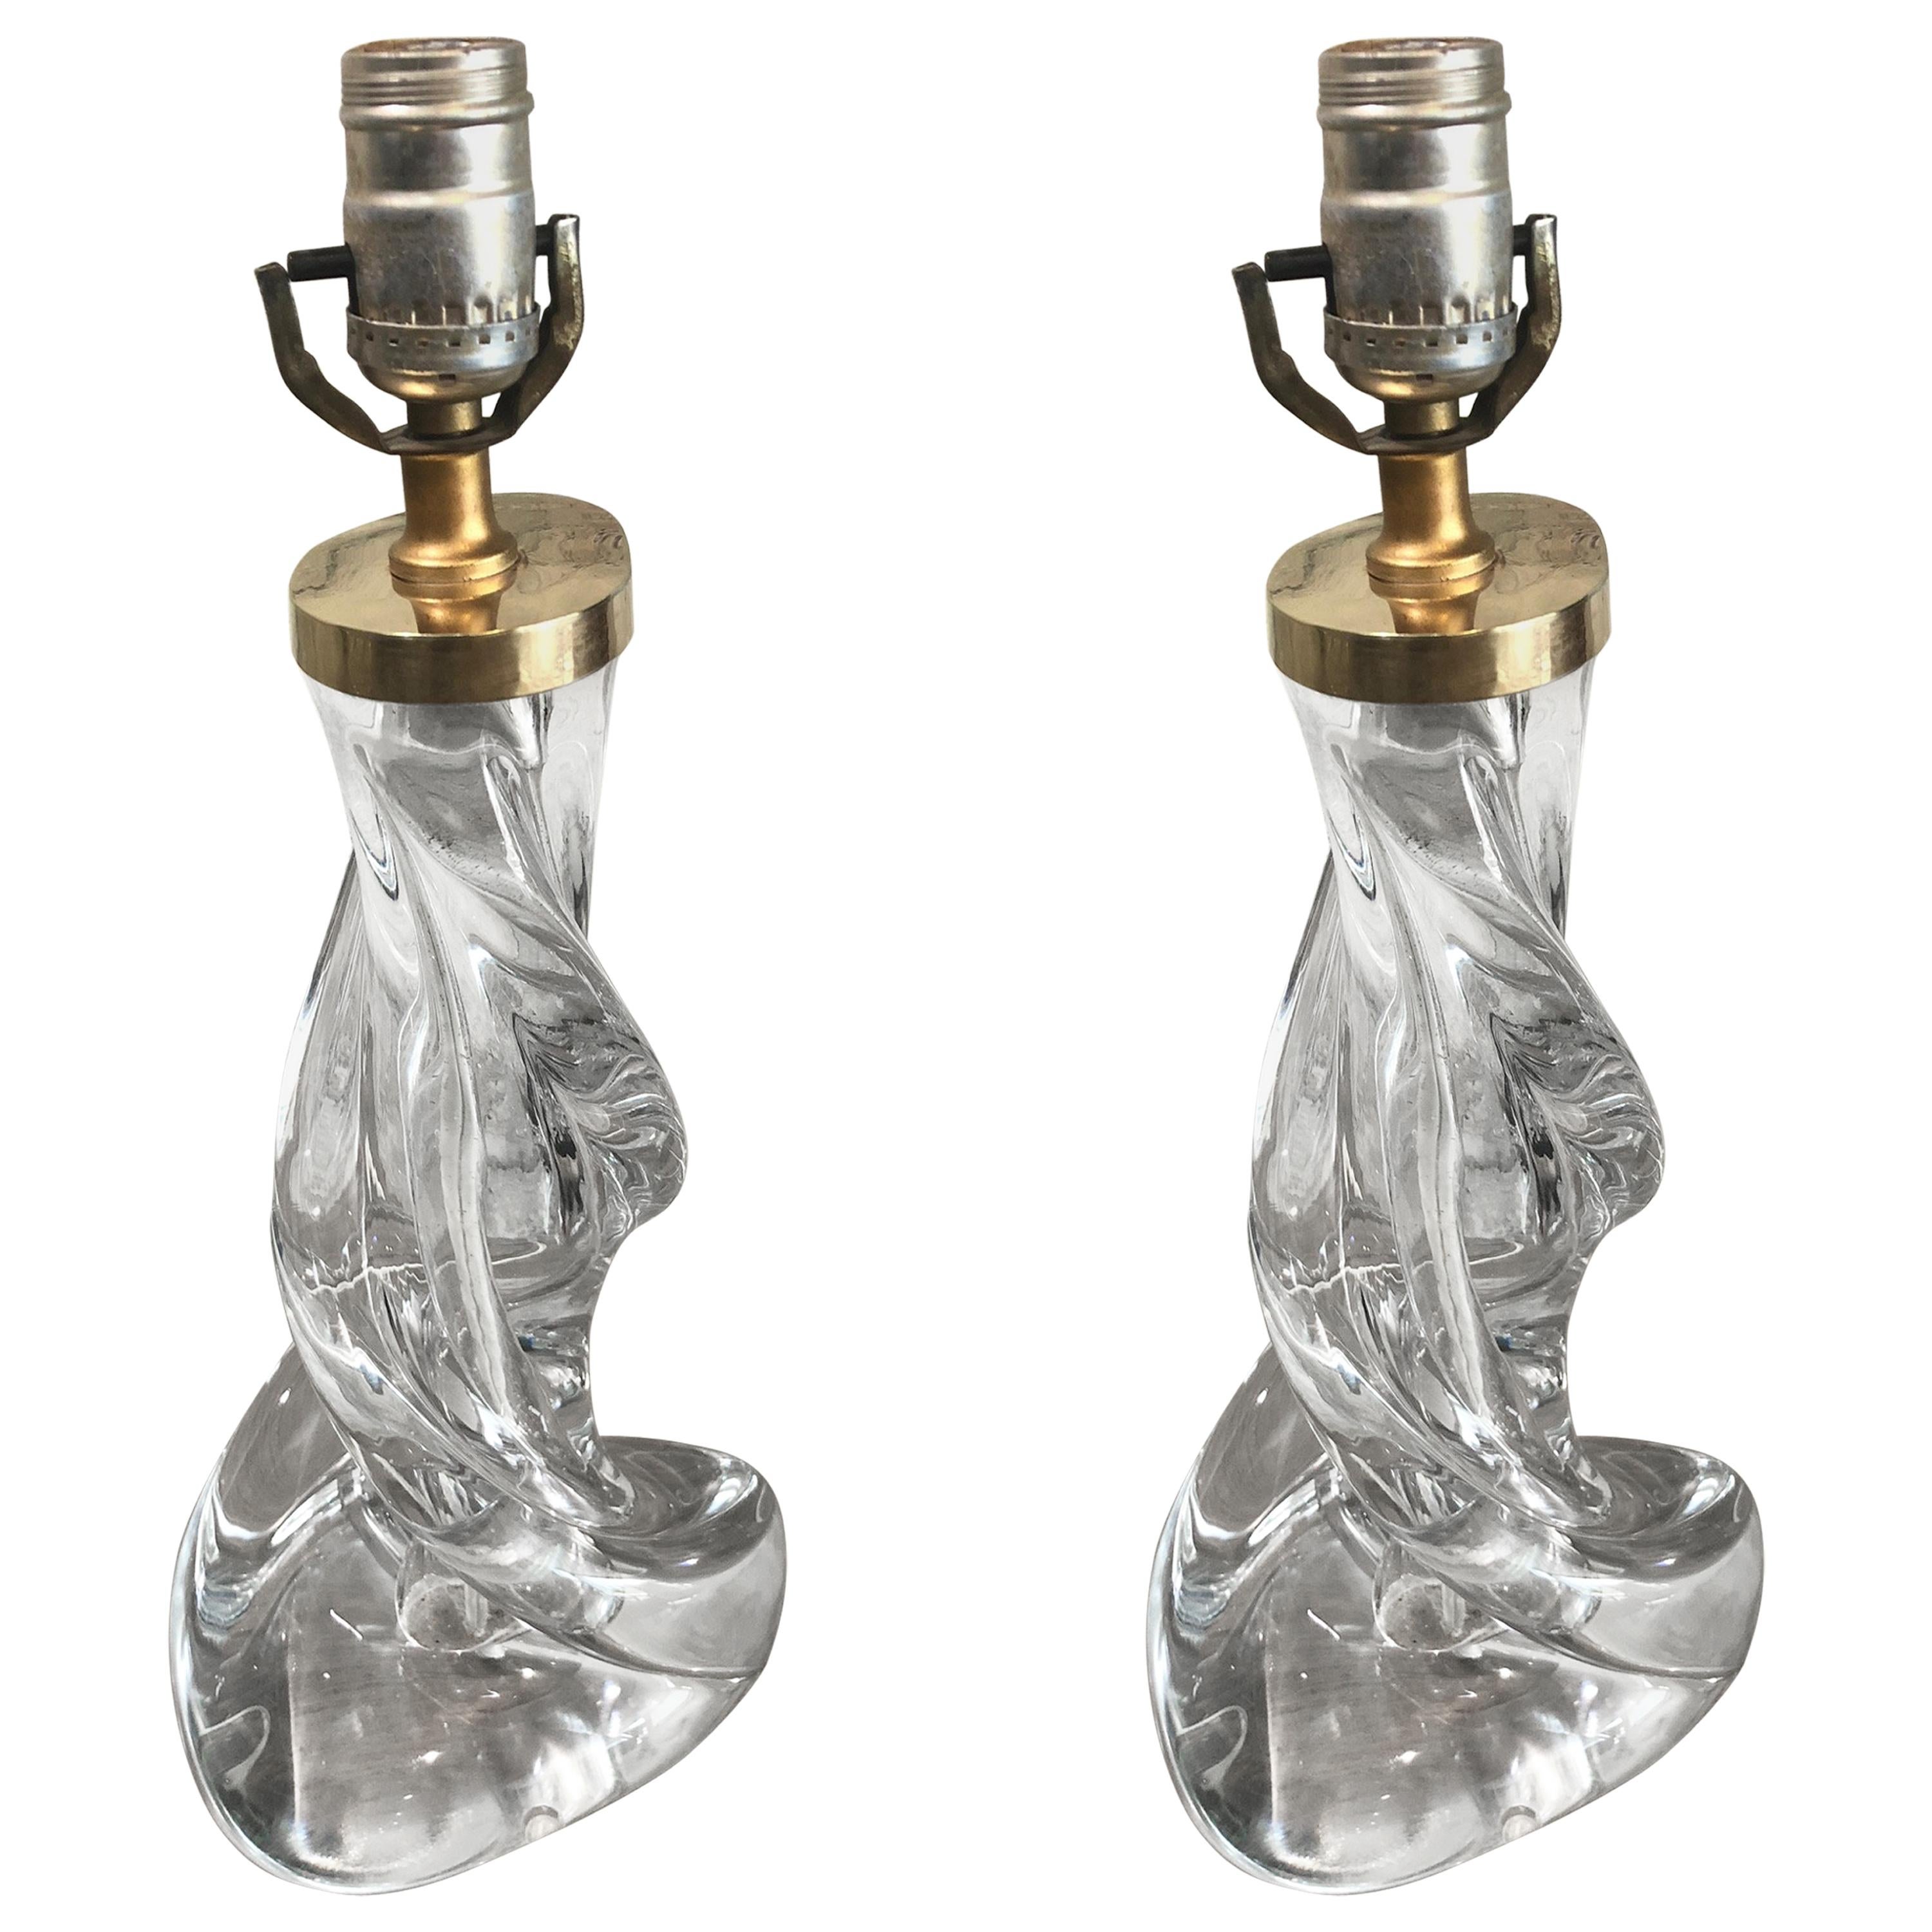 Pair of Mid-Century Modern Twist Murano Glass Table Lamps